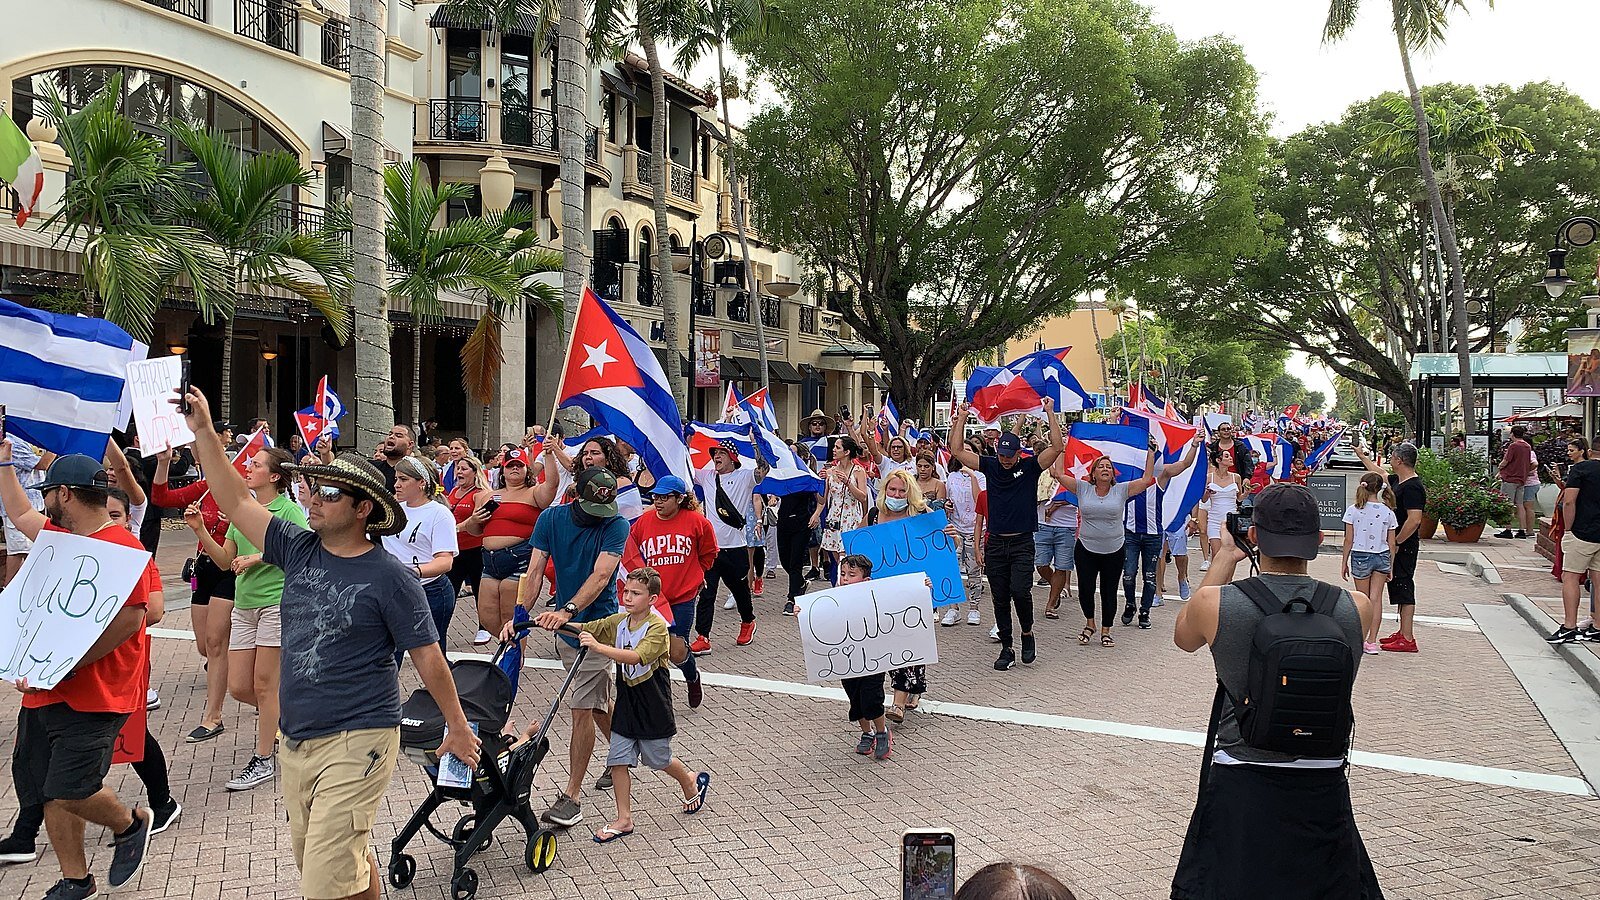 July 13th, 2021 – Anti-Cuban Government protest in Naples, FL. (Photo from Wikimedia Commons)